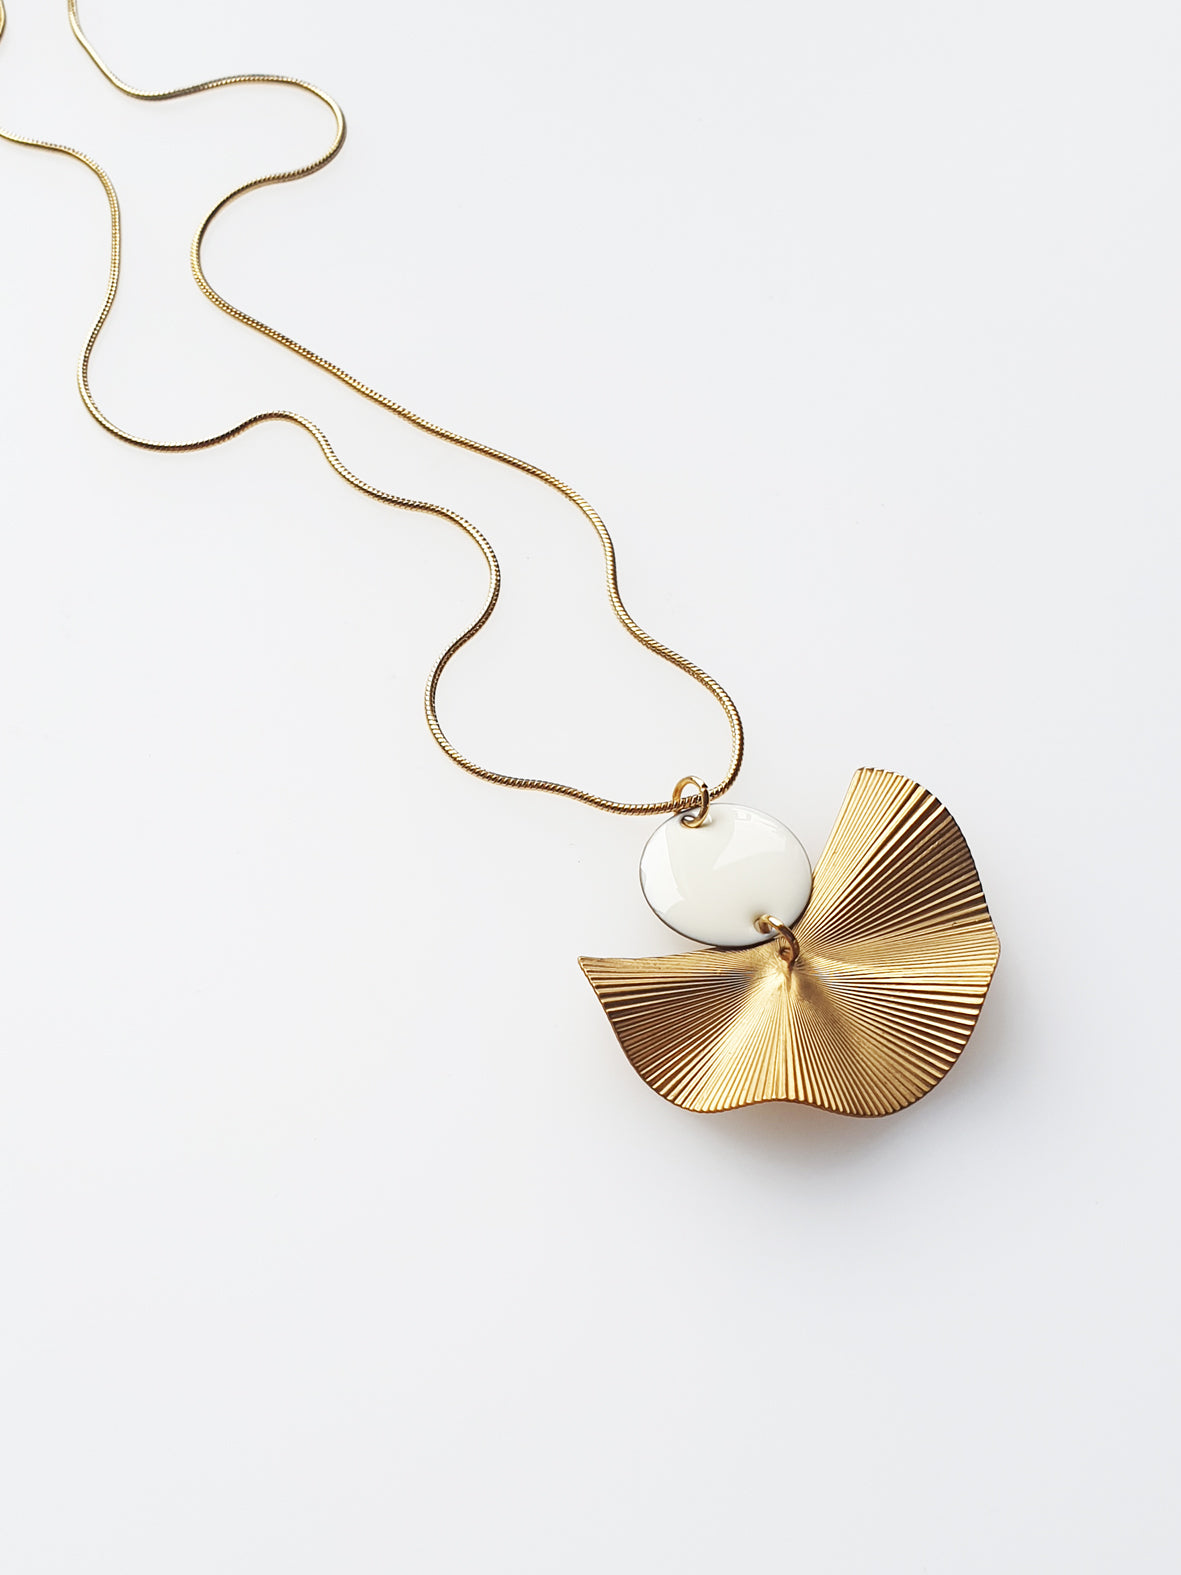 A necklace sits against a white background. It features a gold chain, a white enamel connector dot and a textured brass fan piece.